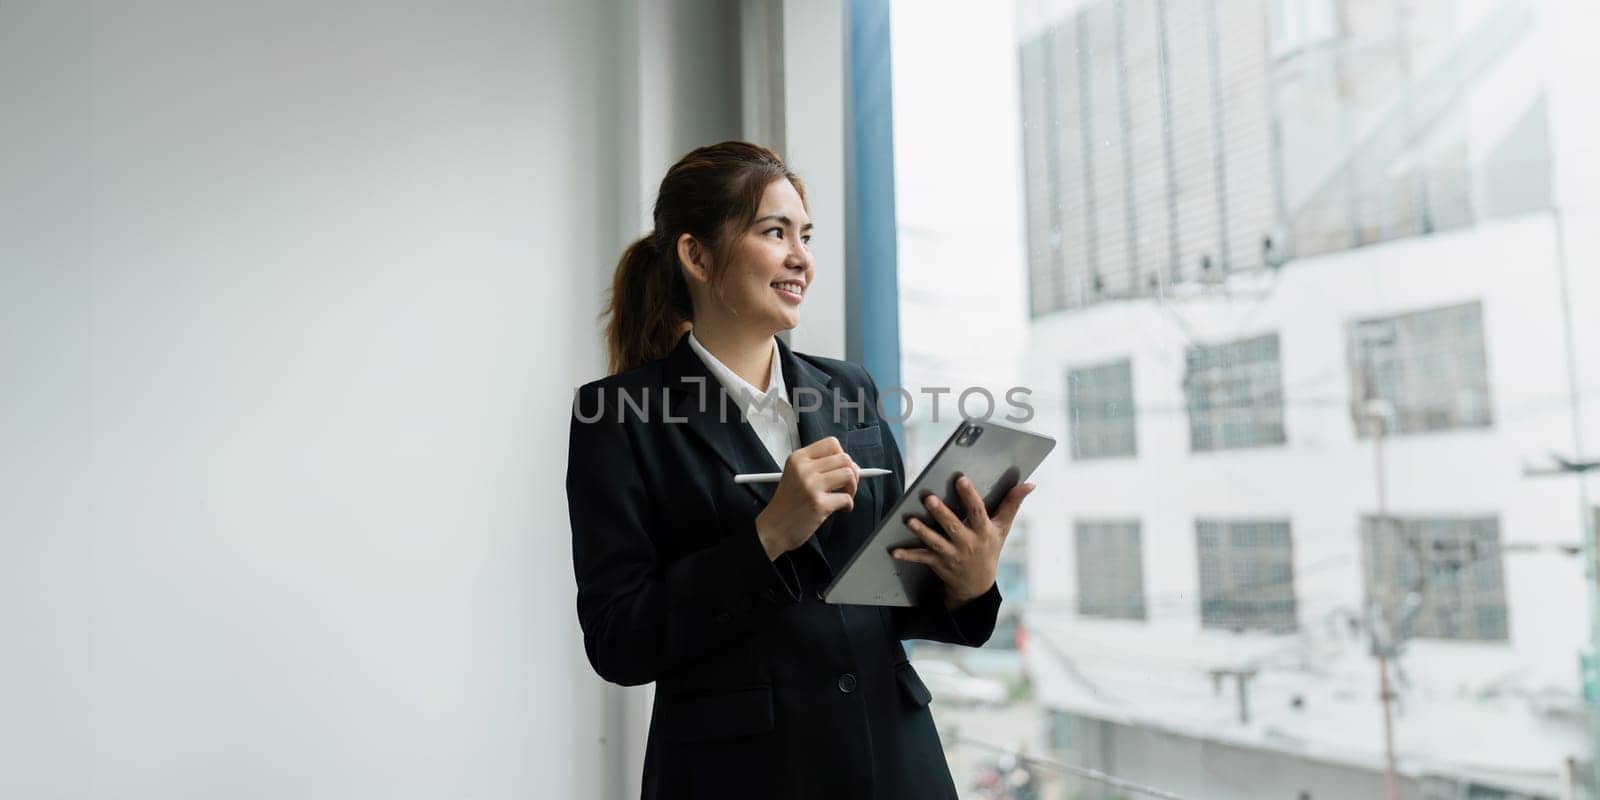 Young happy business woman working with tablet in corporate office. business woman leader, successful entrepreneur.